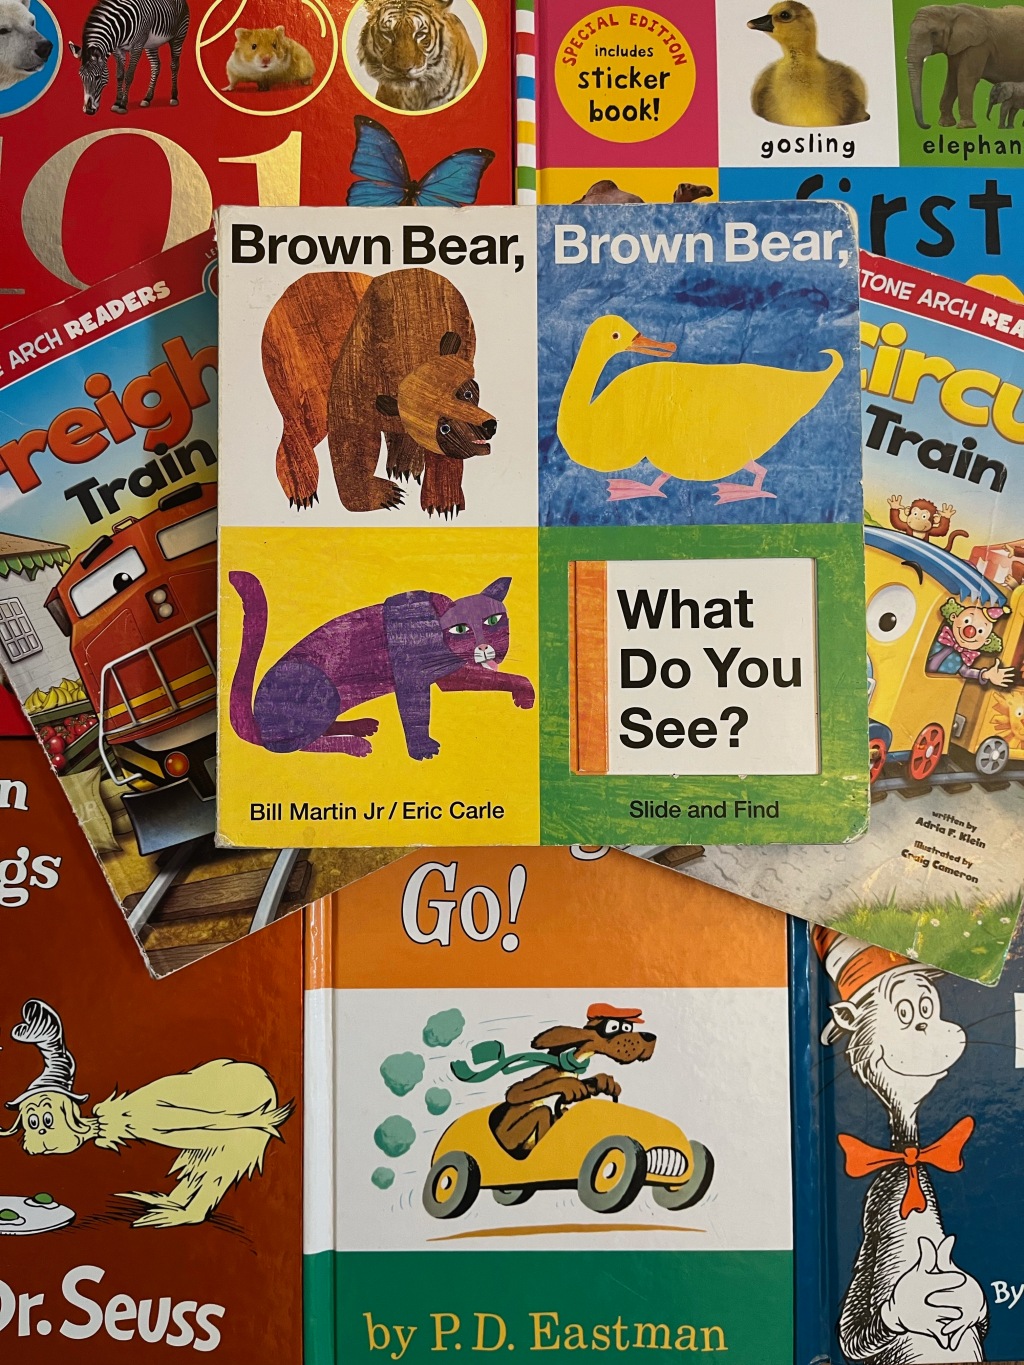 Brown Bear, Brown Bear, What Do You See? by Eric Carl, Go, Dog, Go! by P. D. Eastman, Green Eggs and Ham and The Cat in the Hat by Dr. Seuss, Freight Train, Circus Train, 101 First Animals, First 100 Animals books for kids learning to read